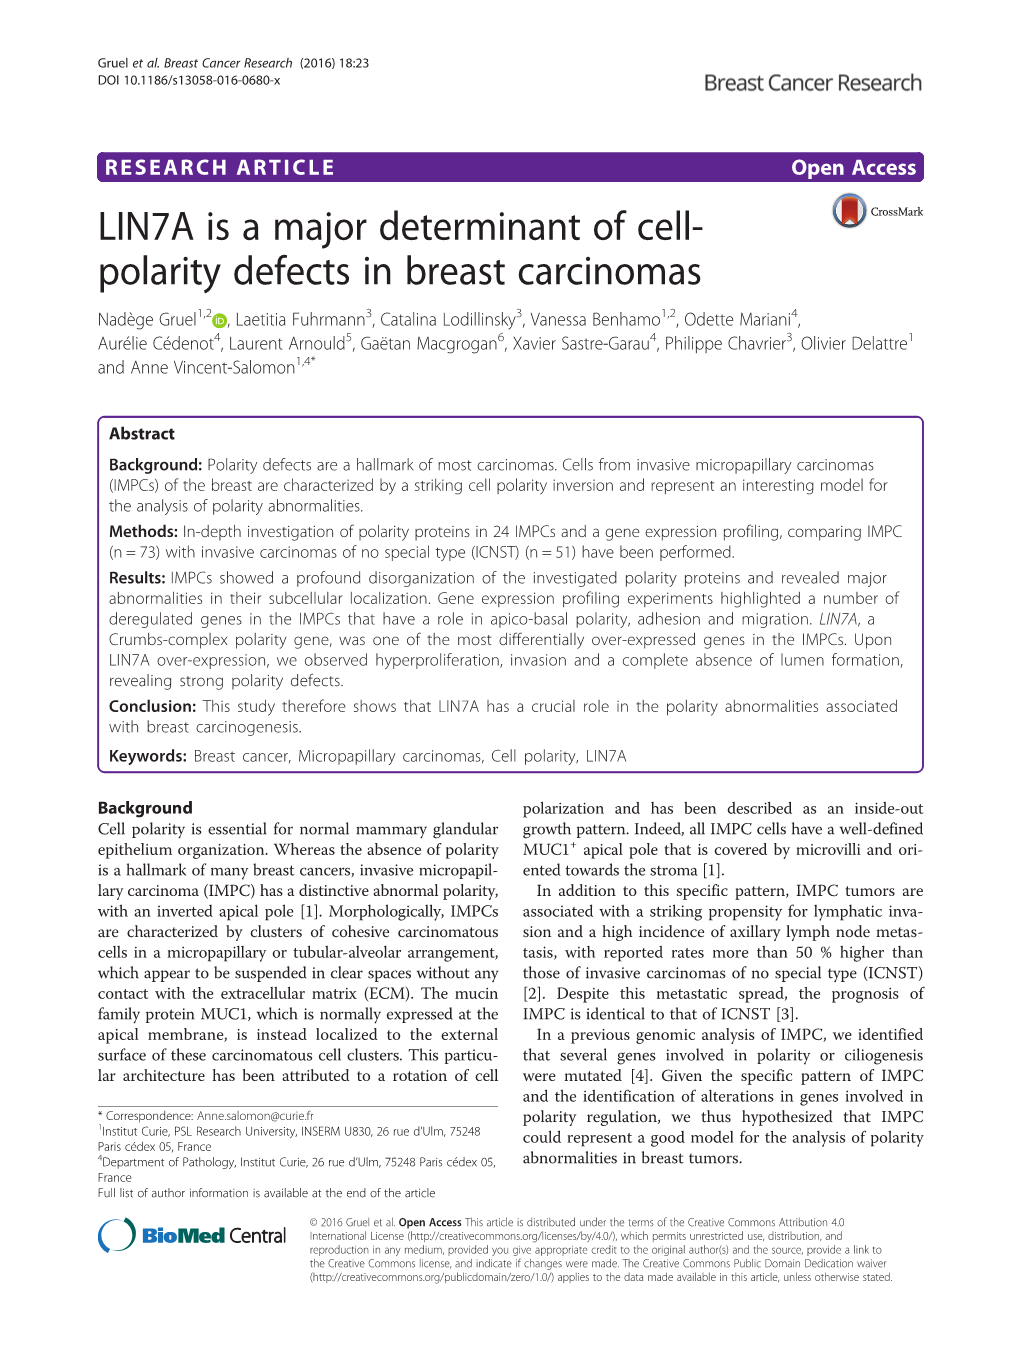 LIN7A Is a Major Determinant of Cell-Polarity Defects in Breast Carcinomas